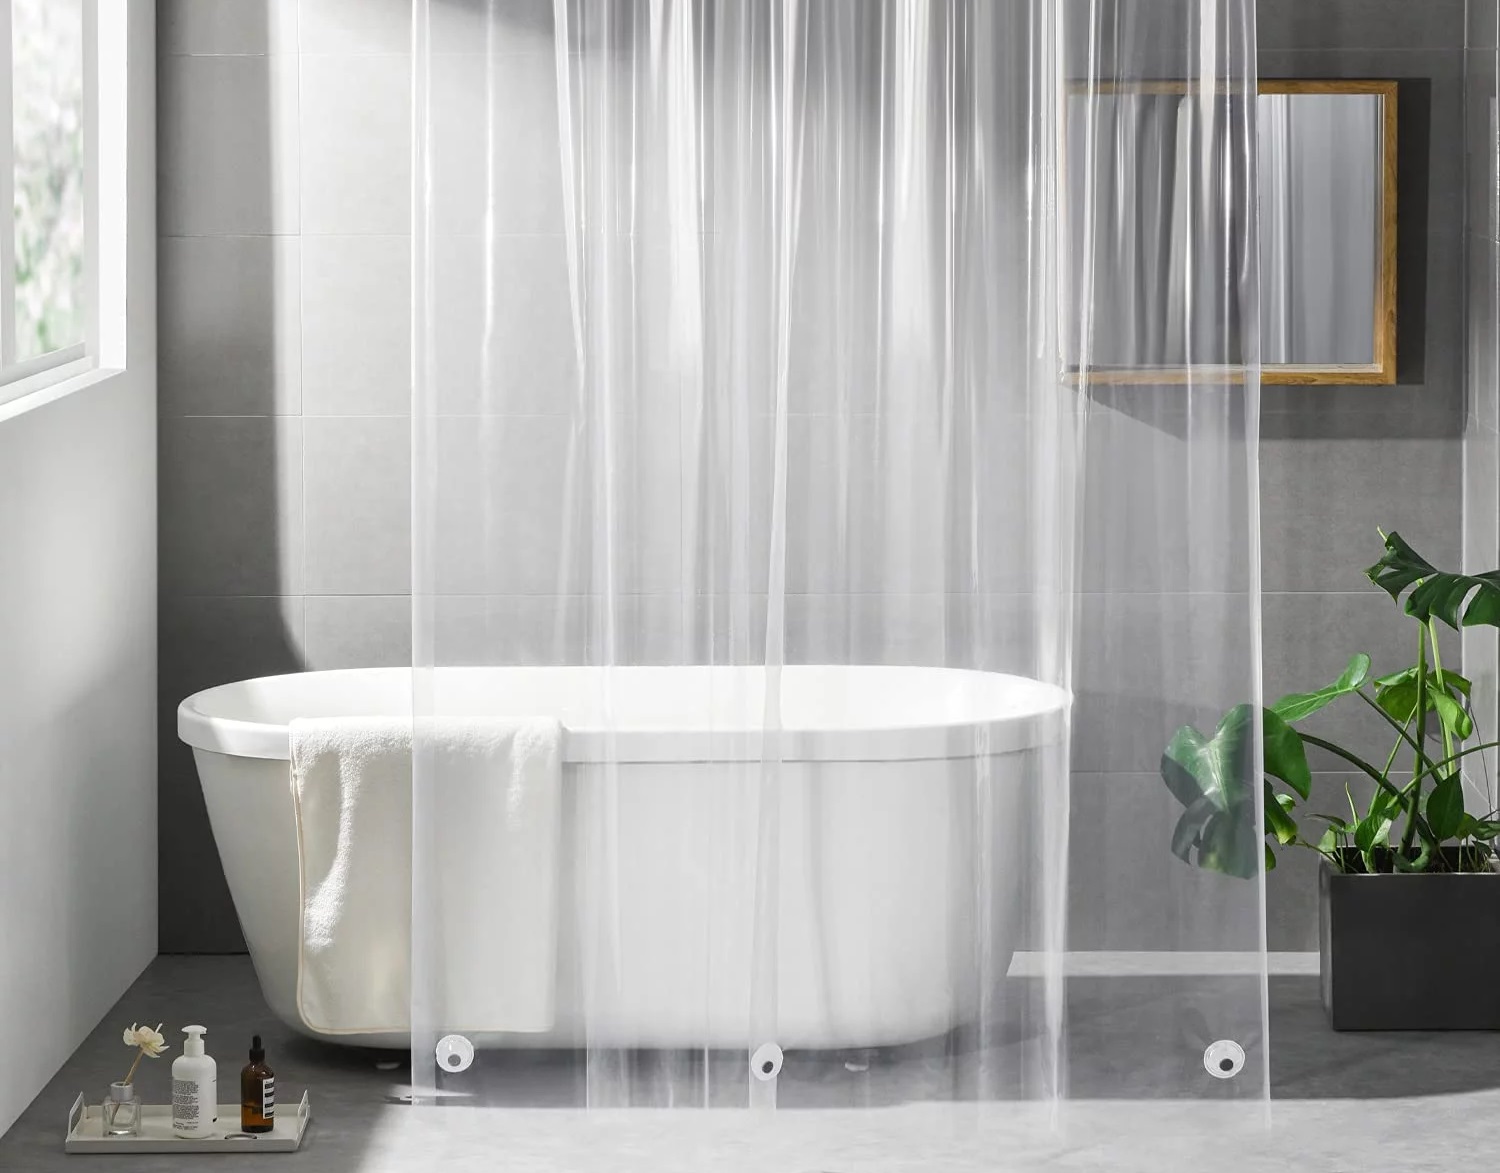 How To Wash A Plastic Shower Curtain In The Washer